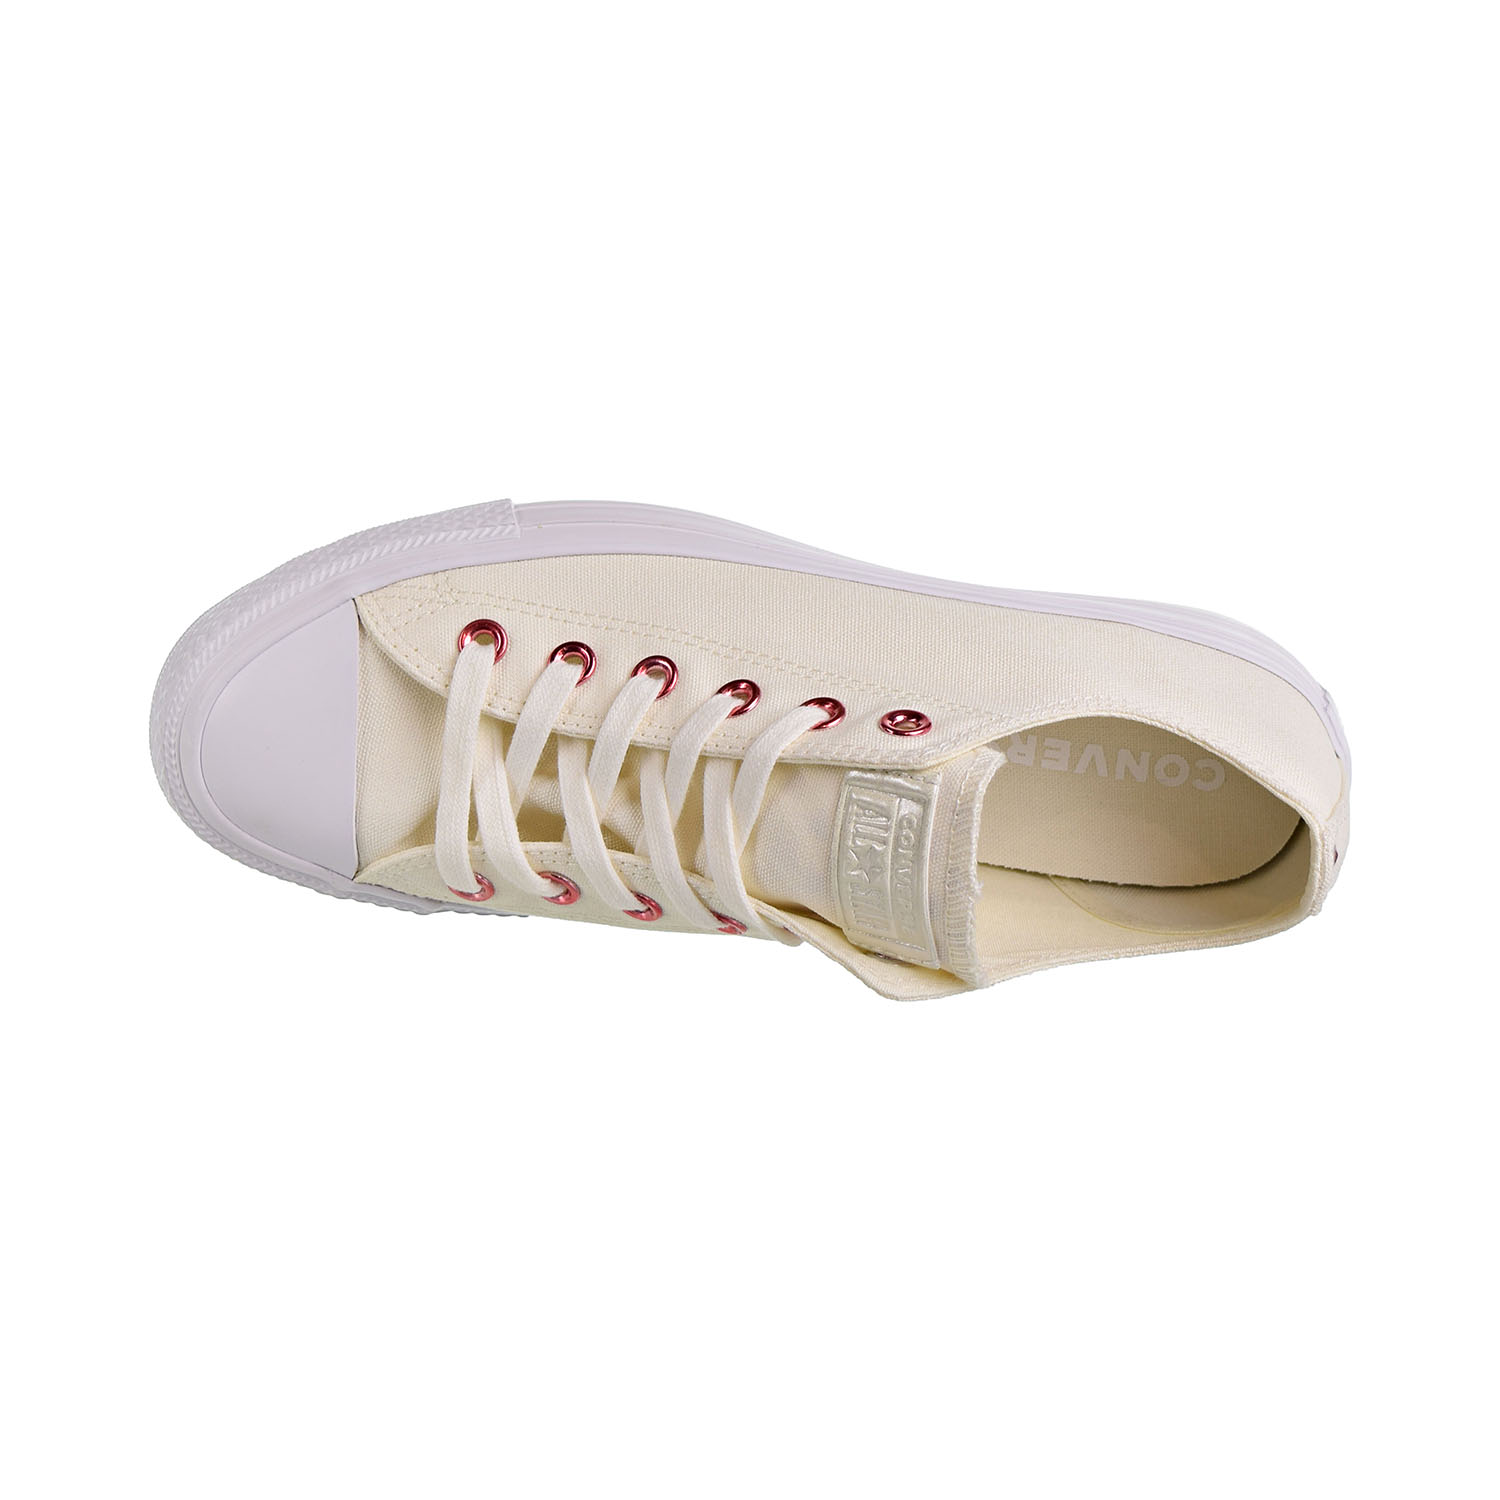 Converse Chuck Taylor All Star Ox Hearts Unisex Shoes Egret-Rhubarb-White 163283c - image 5 of 6